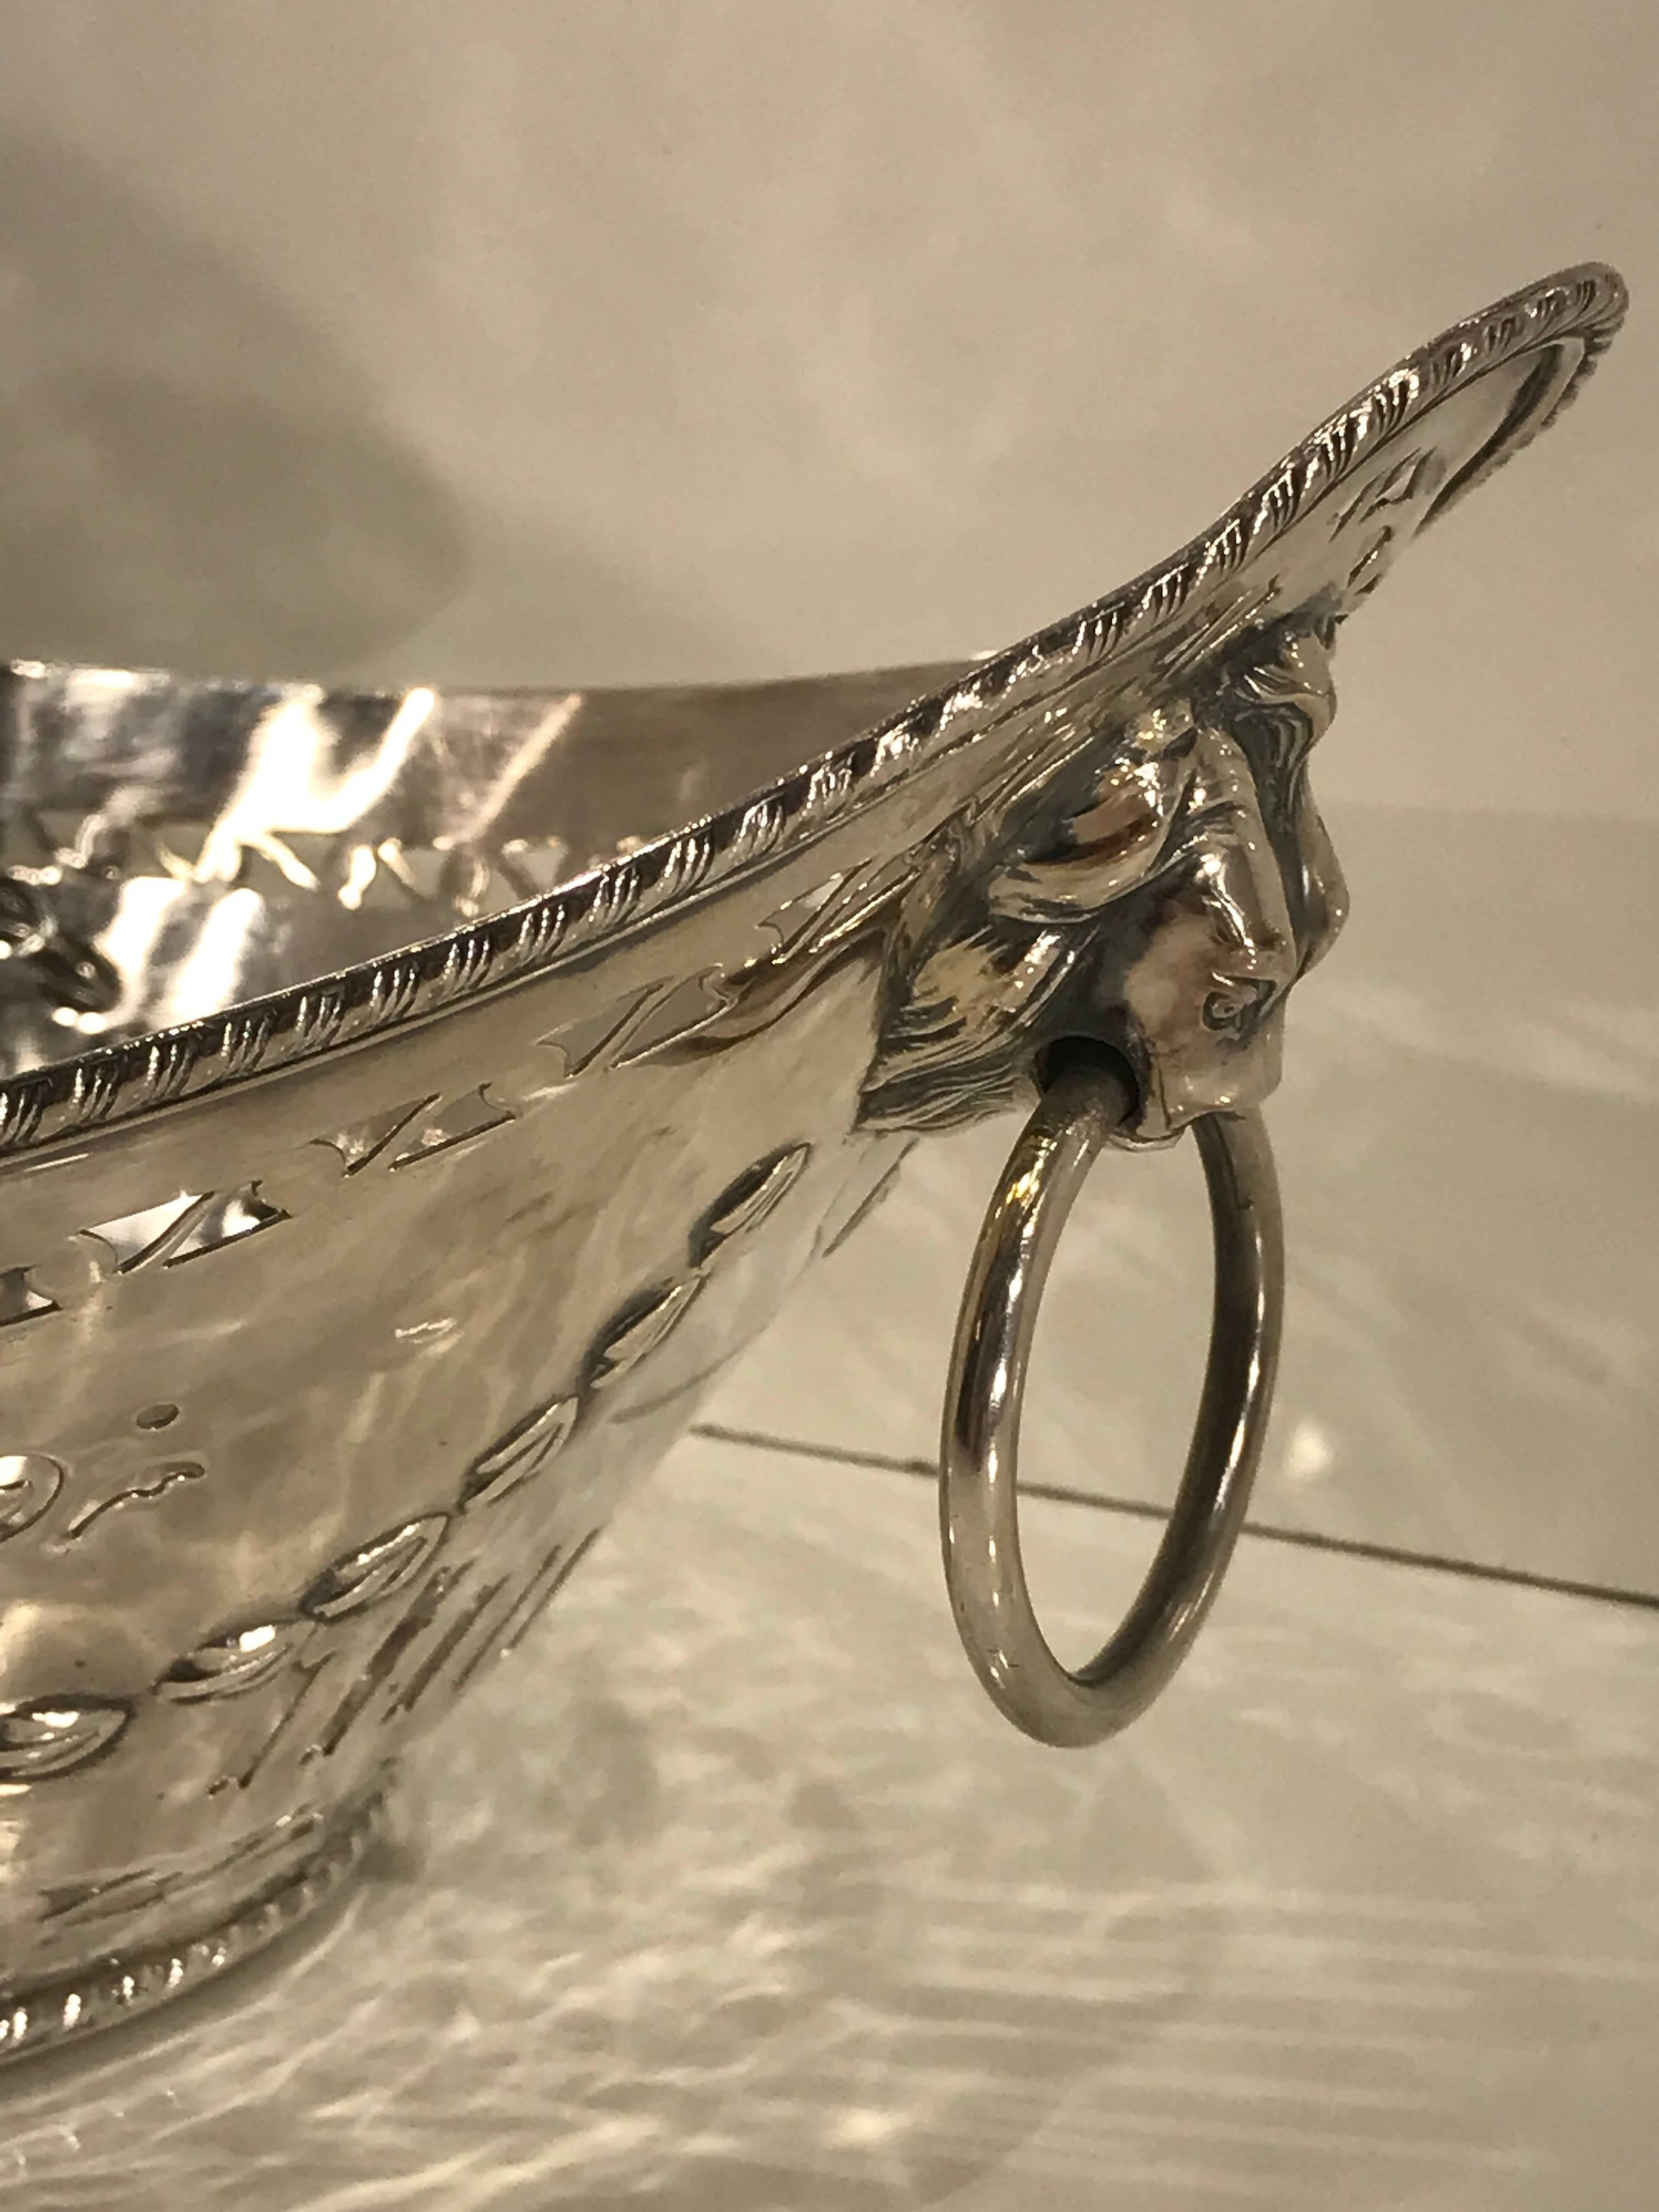 Antique Sheffield plated boat shaped pierced fruit basket with lion mask handles. Finely chased and repoused with pierced body, with lion mask ring handles at each end. Fine antique condition the silver is mostly intact, presents well. Not Marked.